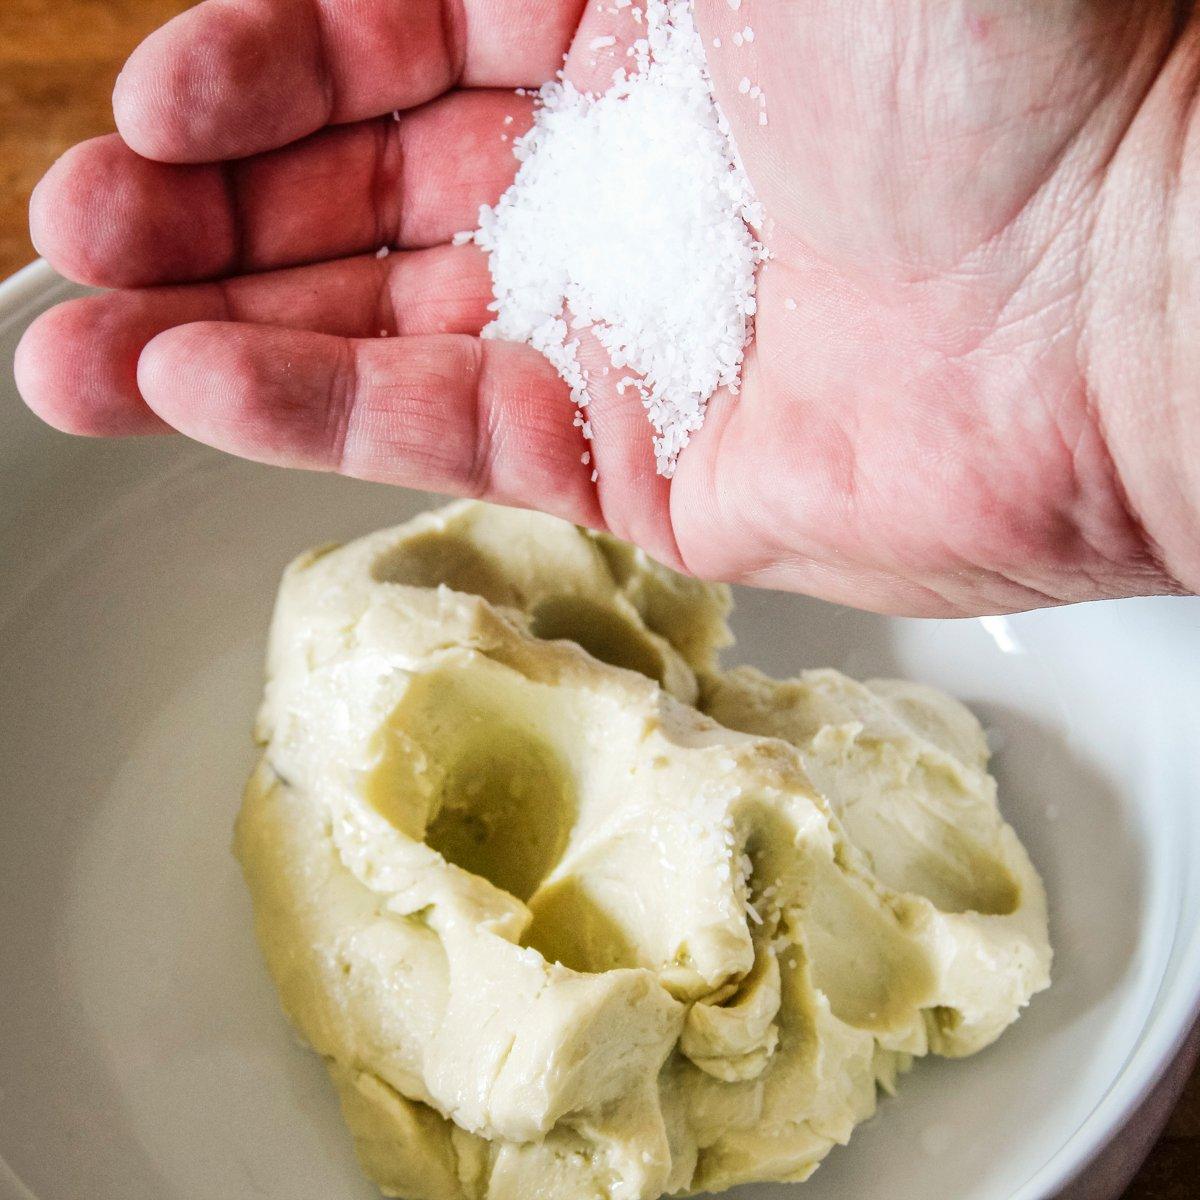 Add salt, a pinch at a time, until your butter tastes the way you want it.